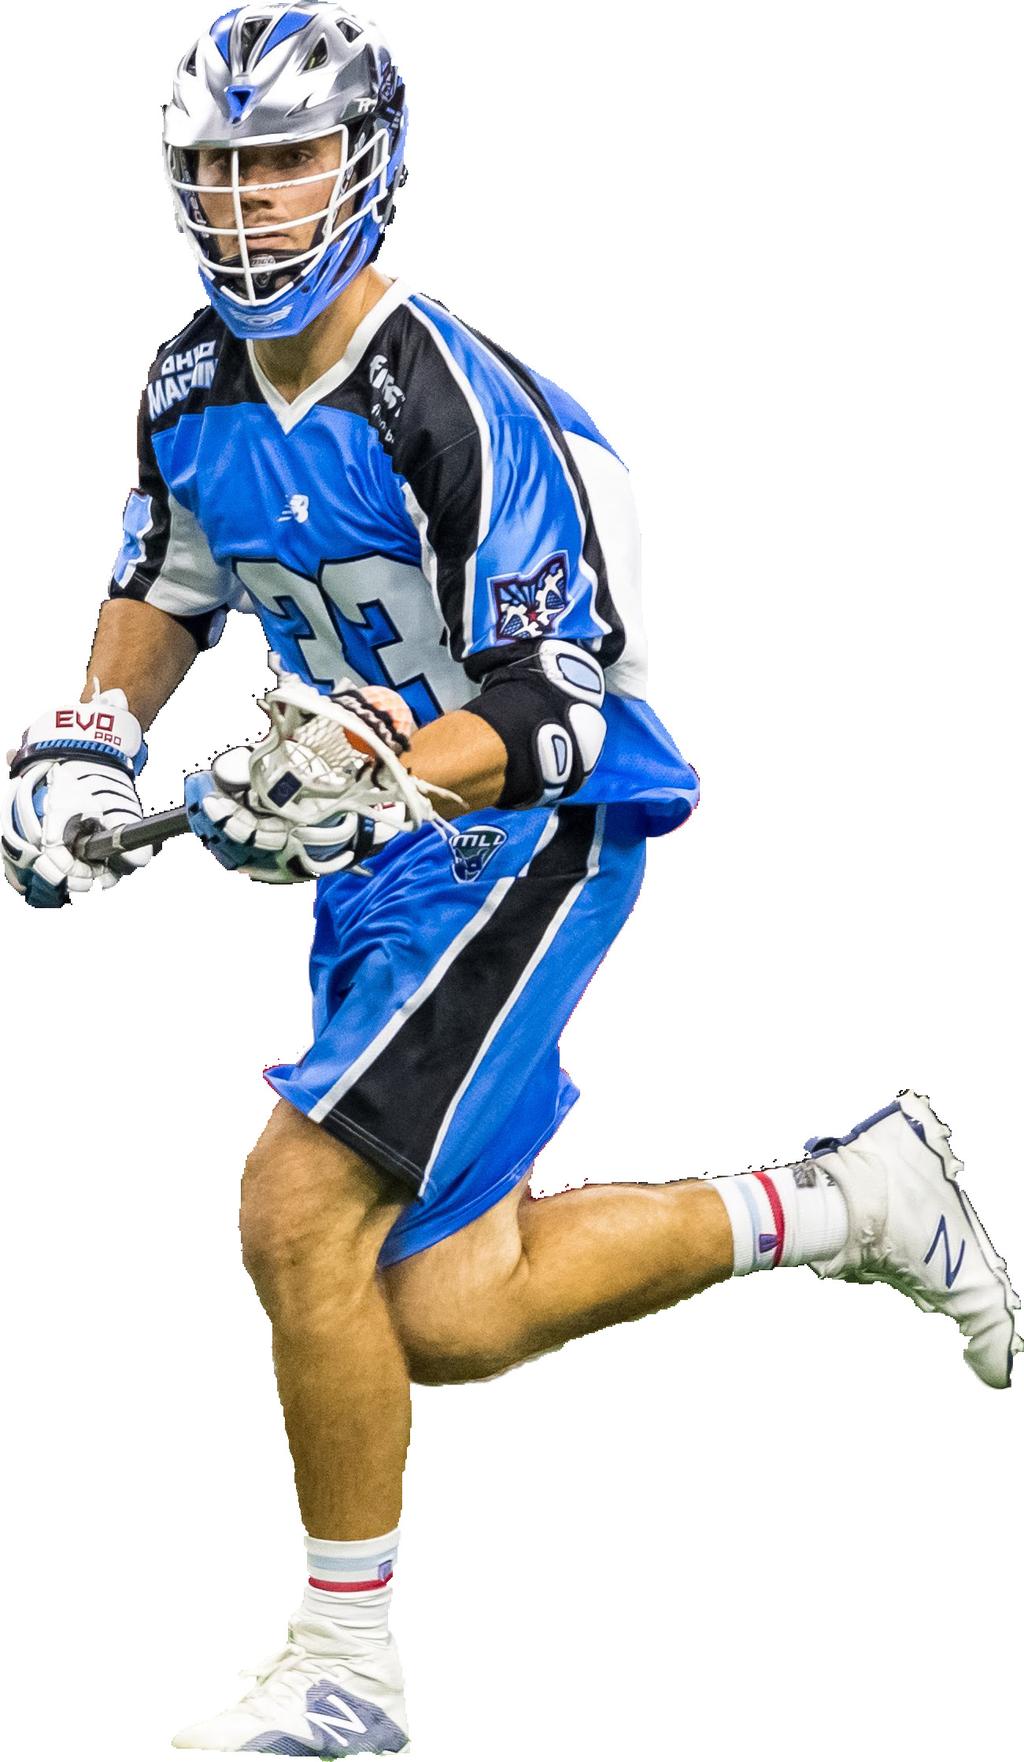 TYLER PFISTER MIDFIELD #33 6 2 185 LBS BORN 8/20/93 HOW ACQUIRED: 2017 MLL DRAFT (63RD OVERALL) TYLER AT A GLANCE 2017 MLL SEASON: Finished with one goal, two assists and four ground balls in three